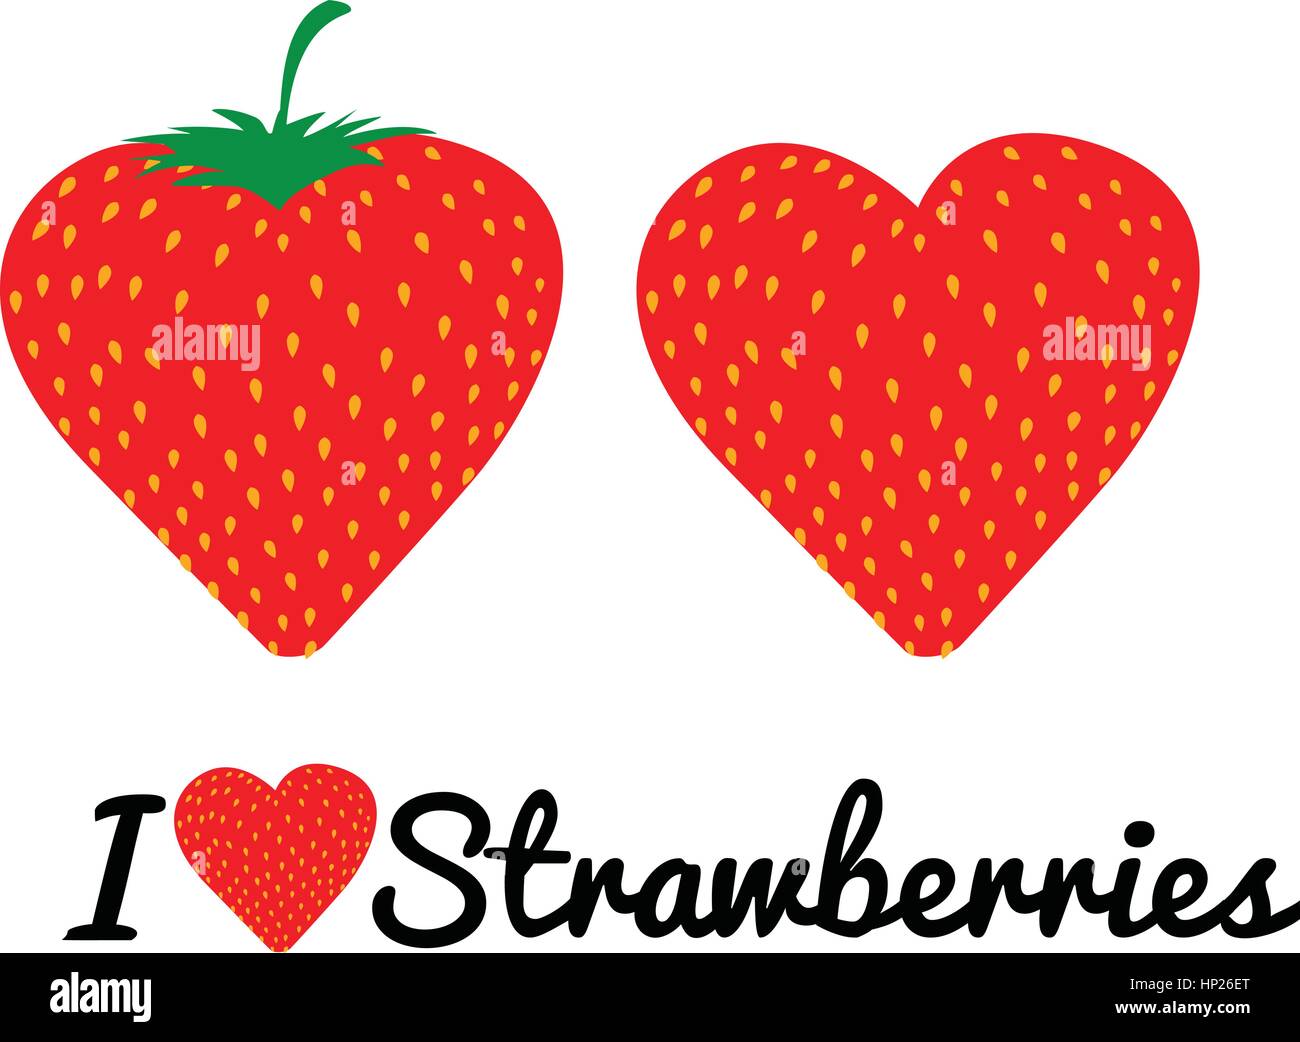 Message in curly typeface 'i love strawberries' Stock Vector